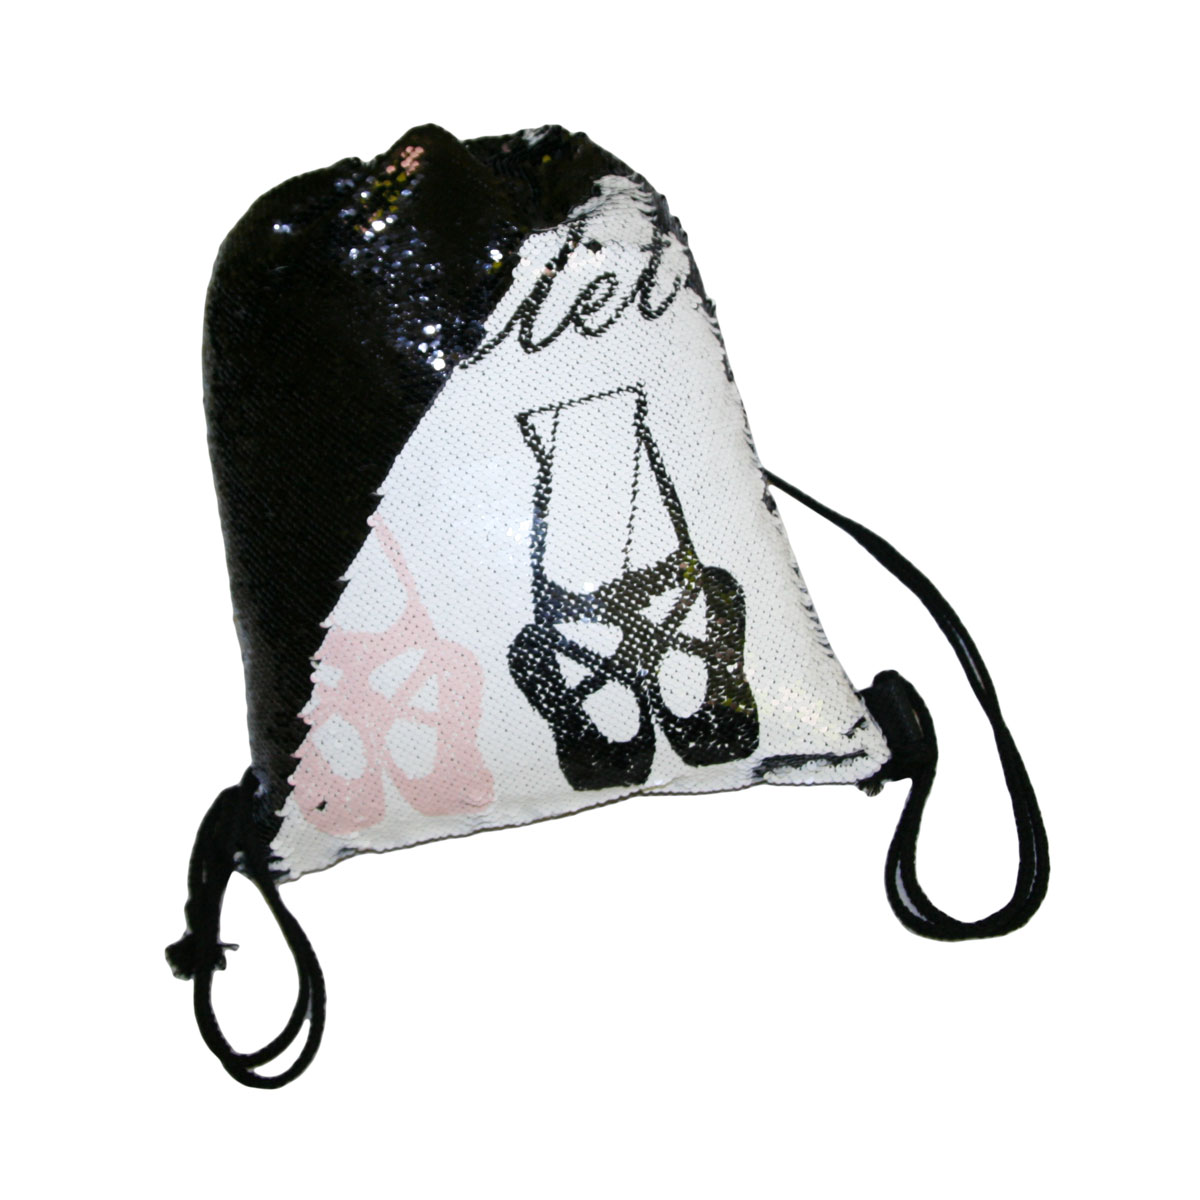 Shoe bag with two-color sequins for sublimation